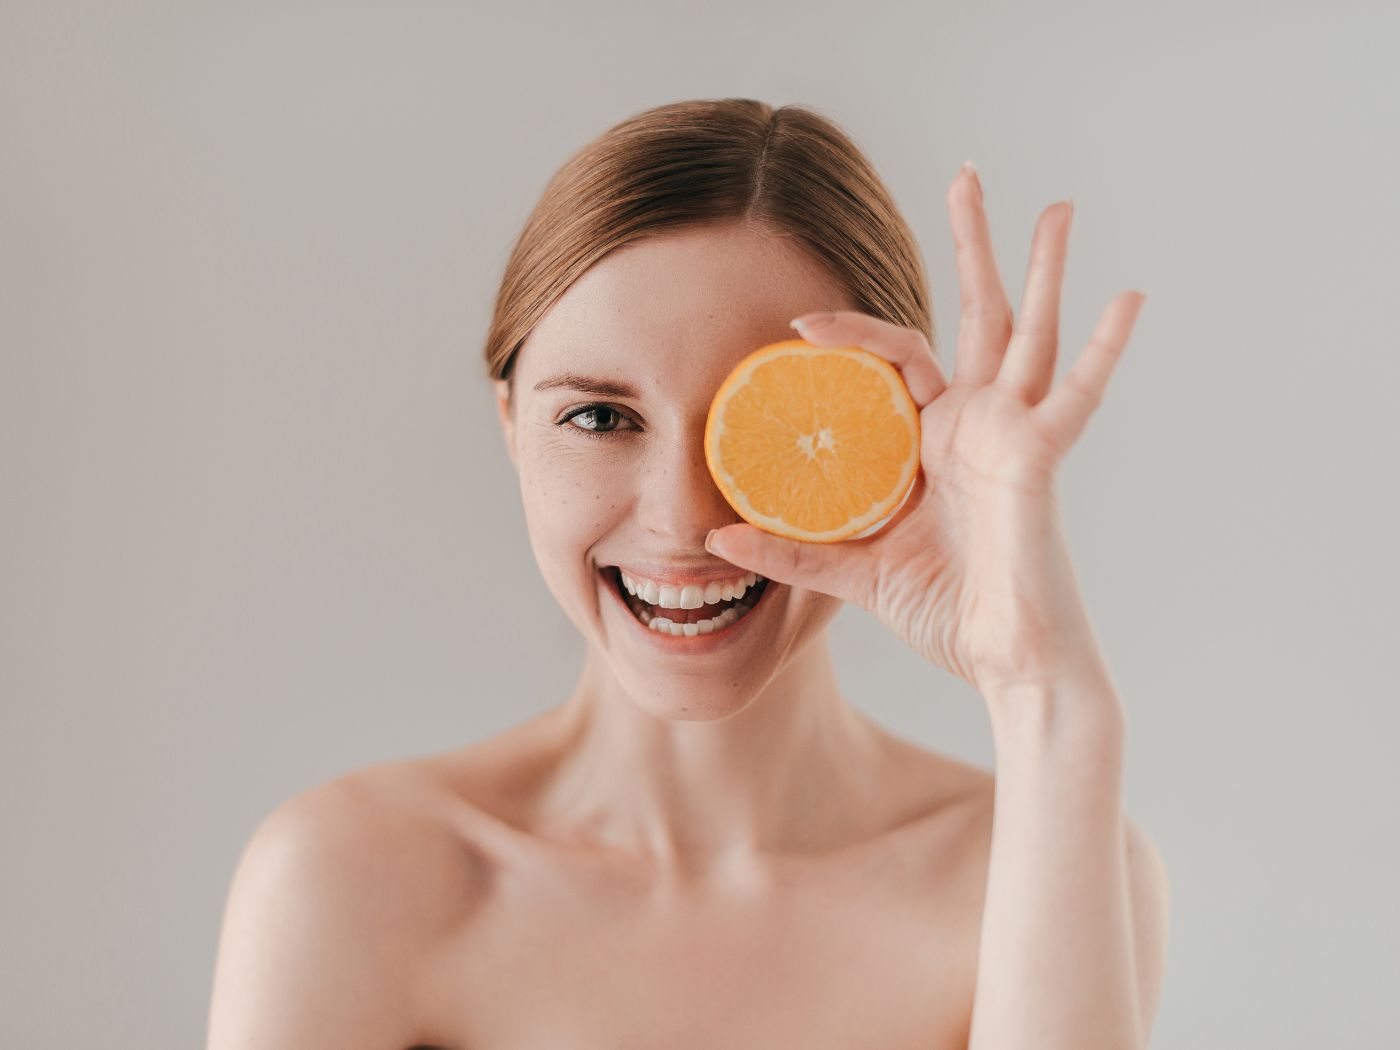 6 Beneficial Reasons to Start Using Vitamin C to Your Skin's Advantage